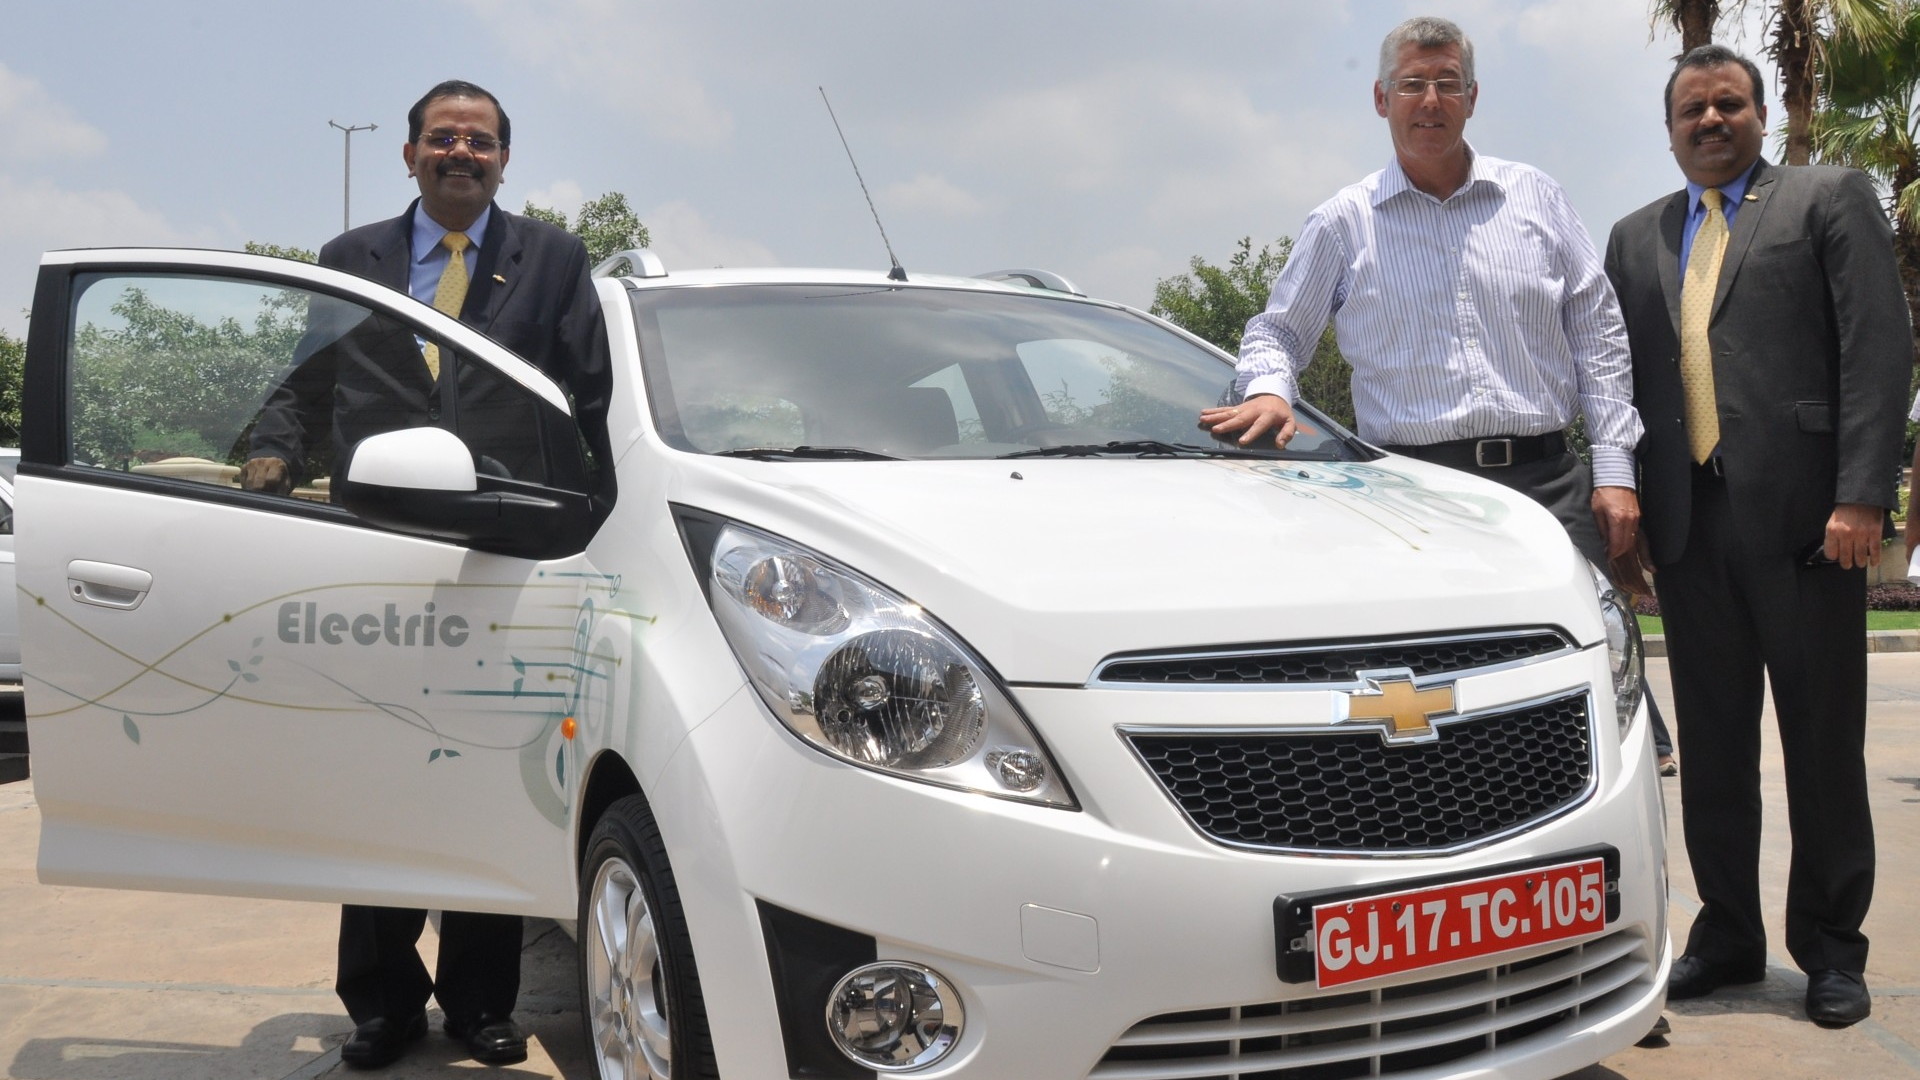 Chevrolet Beat EV electric vehicle with GM executives, India, June 2011